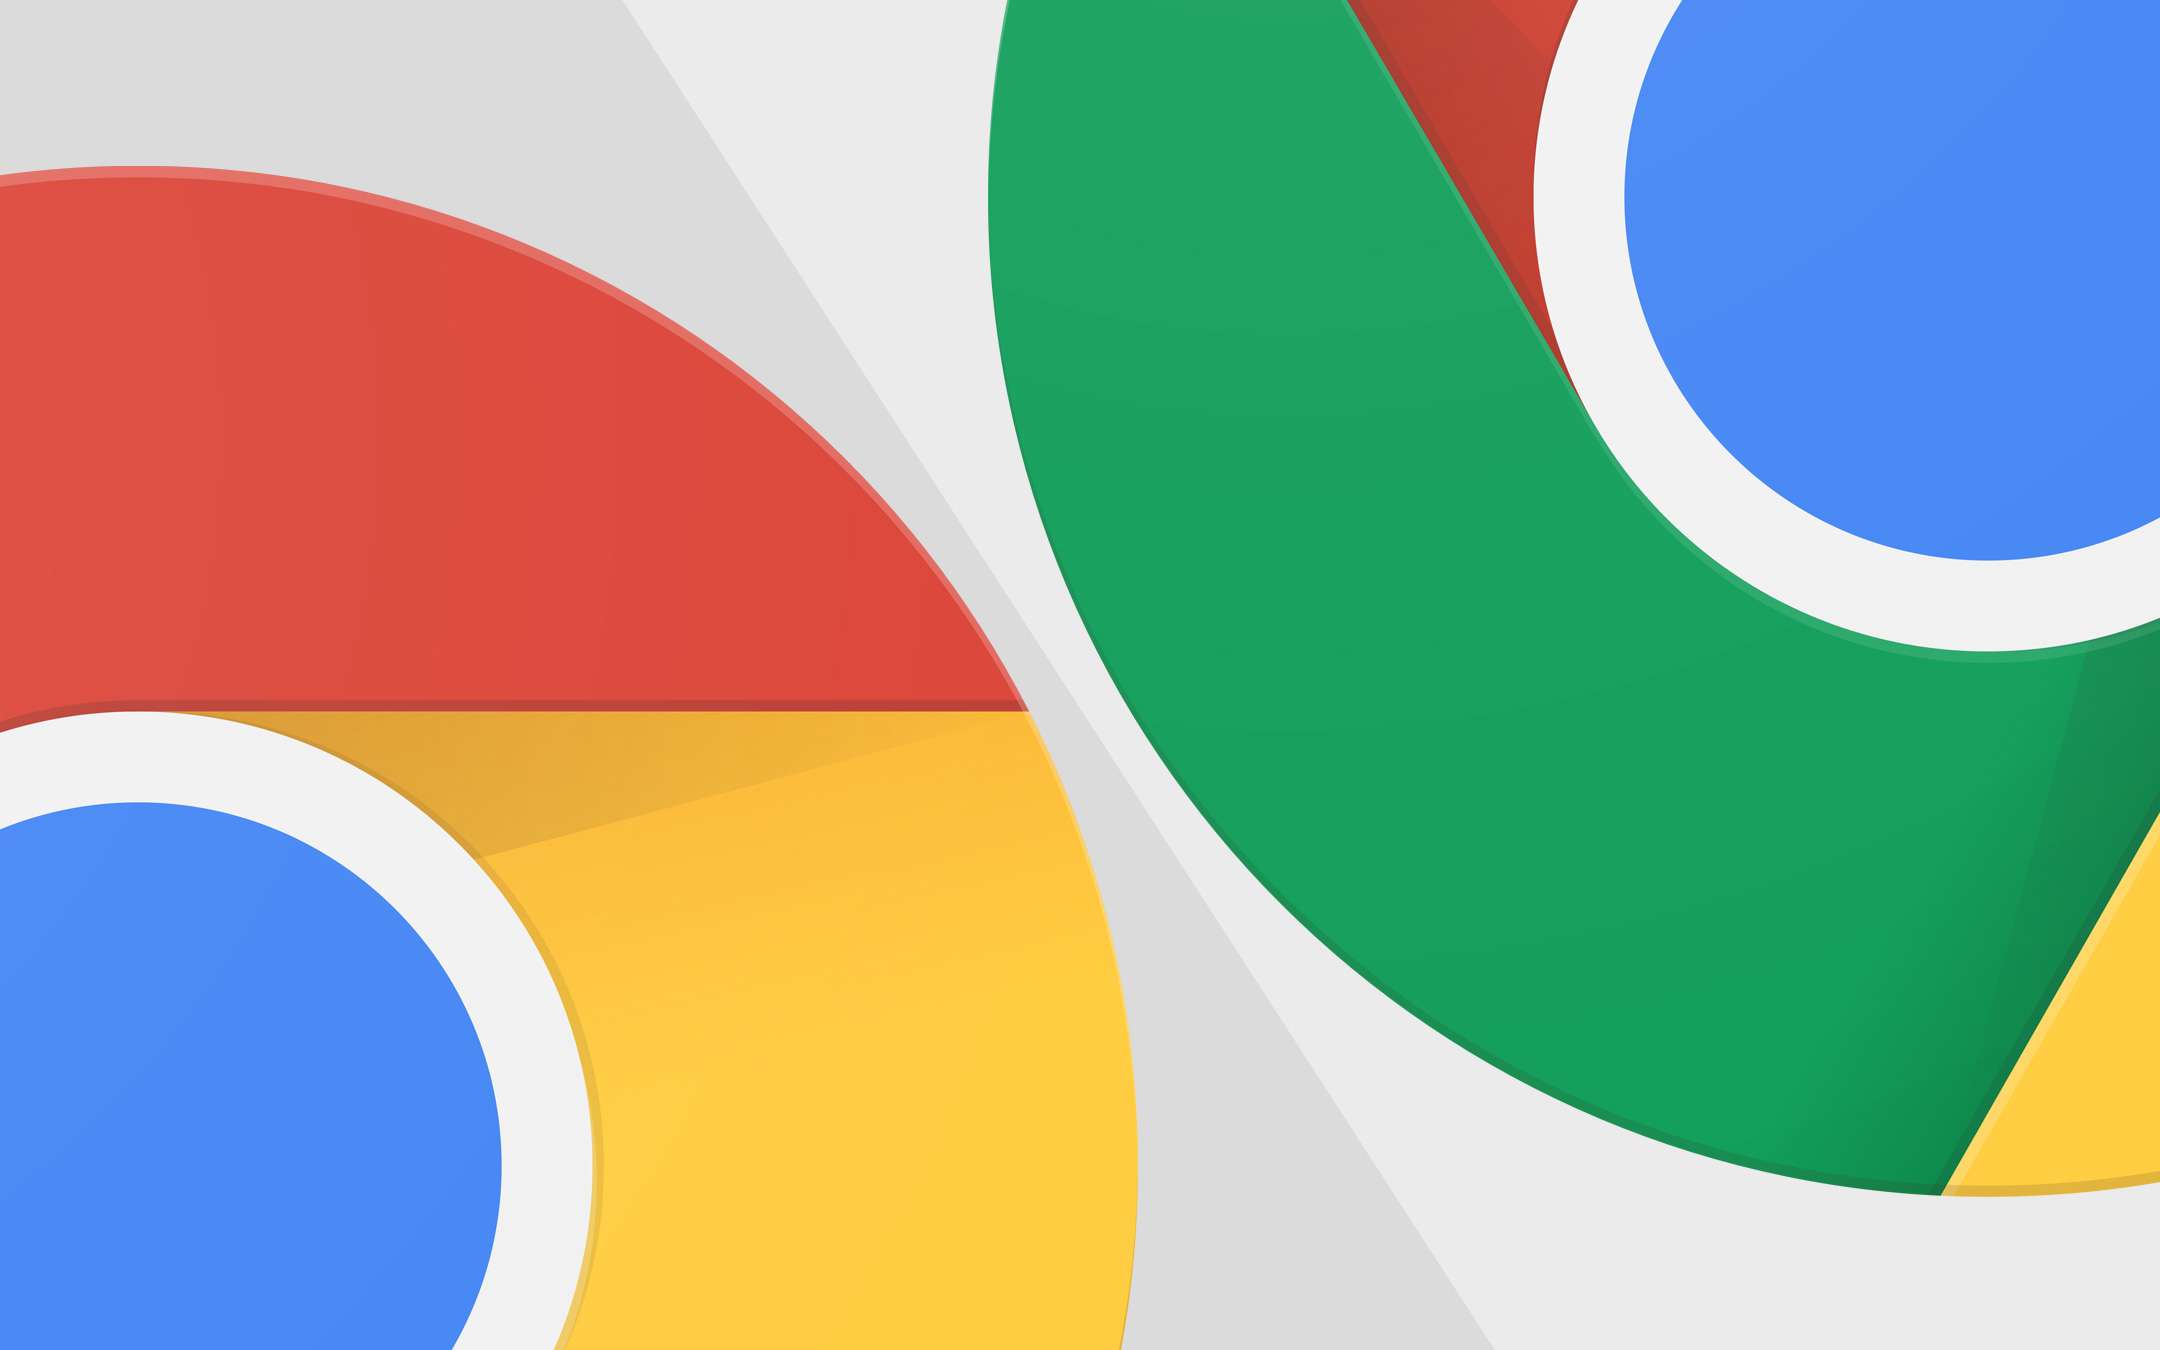 Google Chrome: More transparency for extensions